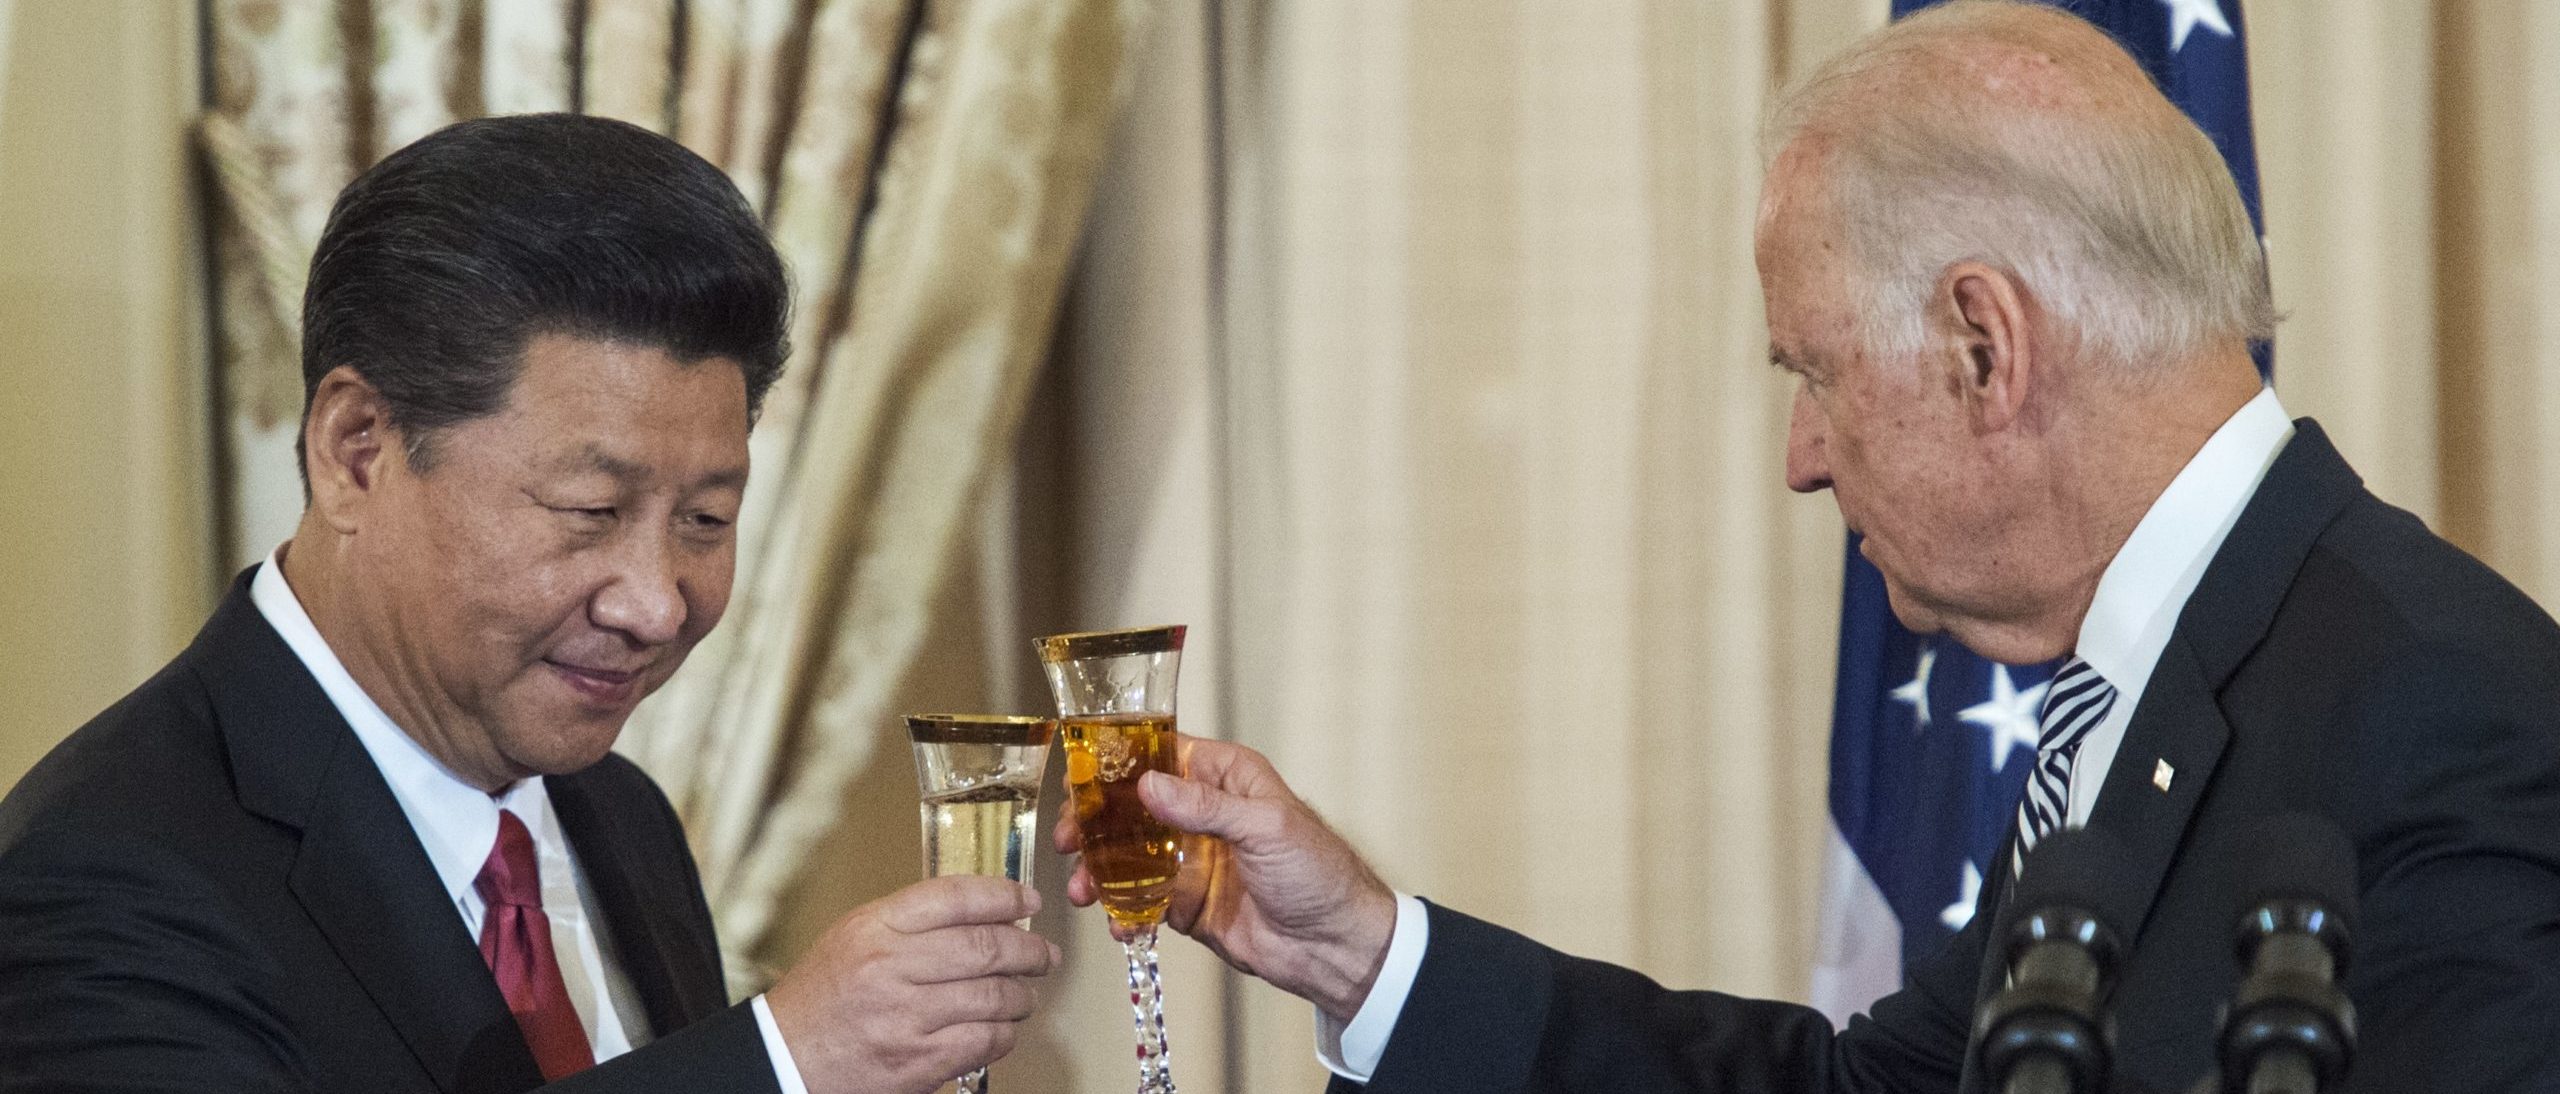 US Vice President Joe Biden and Chinese President Xi Jinping toast during a State Luncheon for China hosted by US Secretary of State John Kerry on September 25, 2015 at the Department of State in Washington, DC. (PAUL J. RICHARDS/AFP via Getty Images)